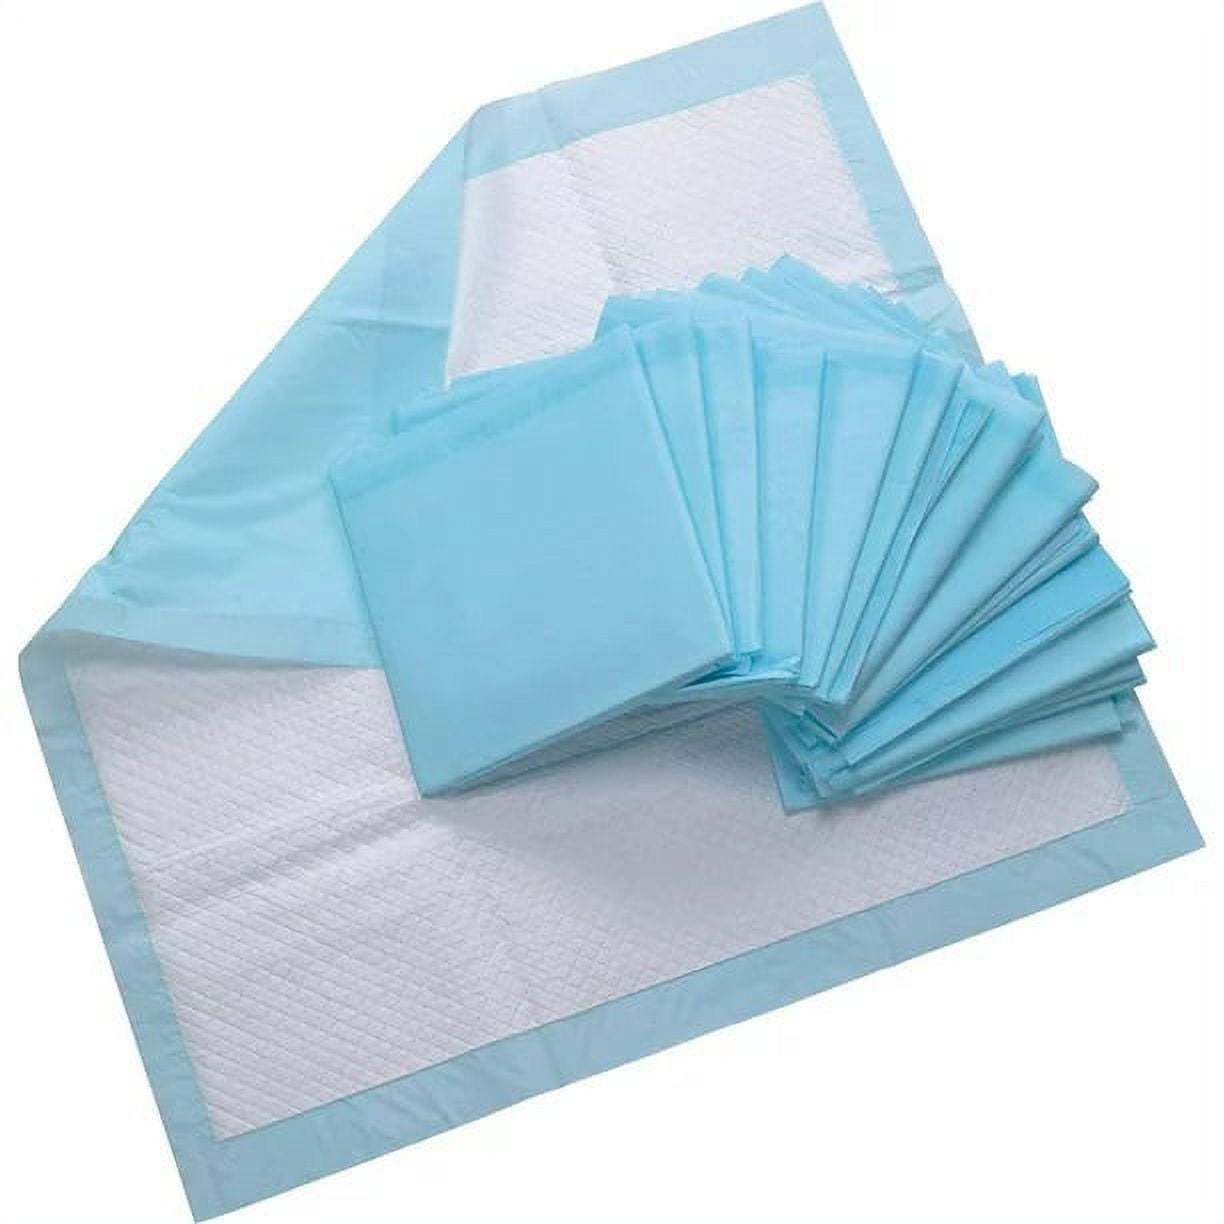  40 XL 36 x 36 Heavy Duty Ultra Absorbent Bed Pads w/ Adhesive  by Nurture  Disposable Chux Liners, Underpads, Adult Incontinence Hospital  Grade Chucks : Health & Household